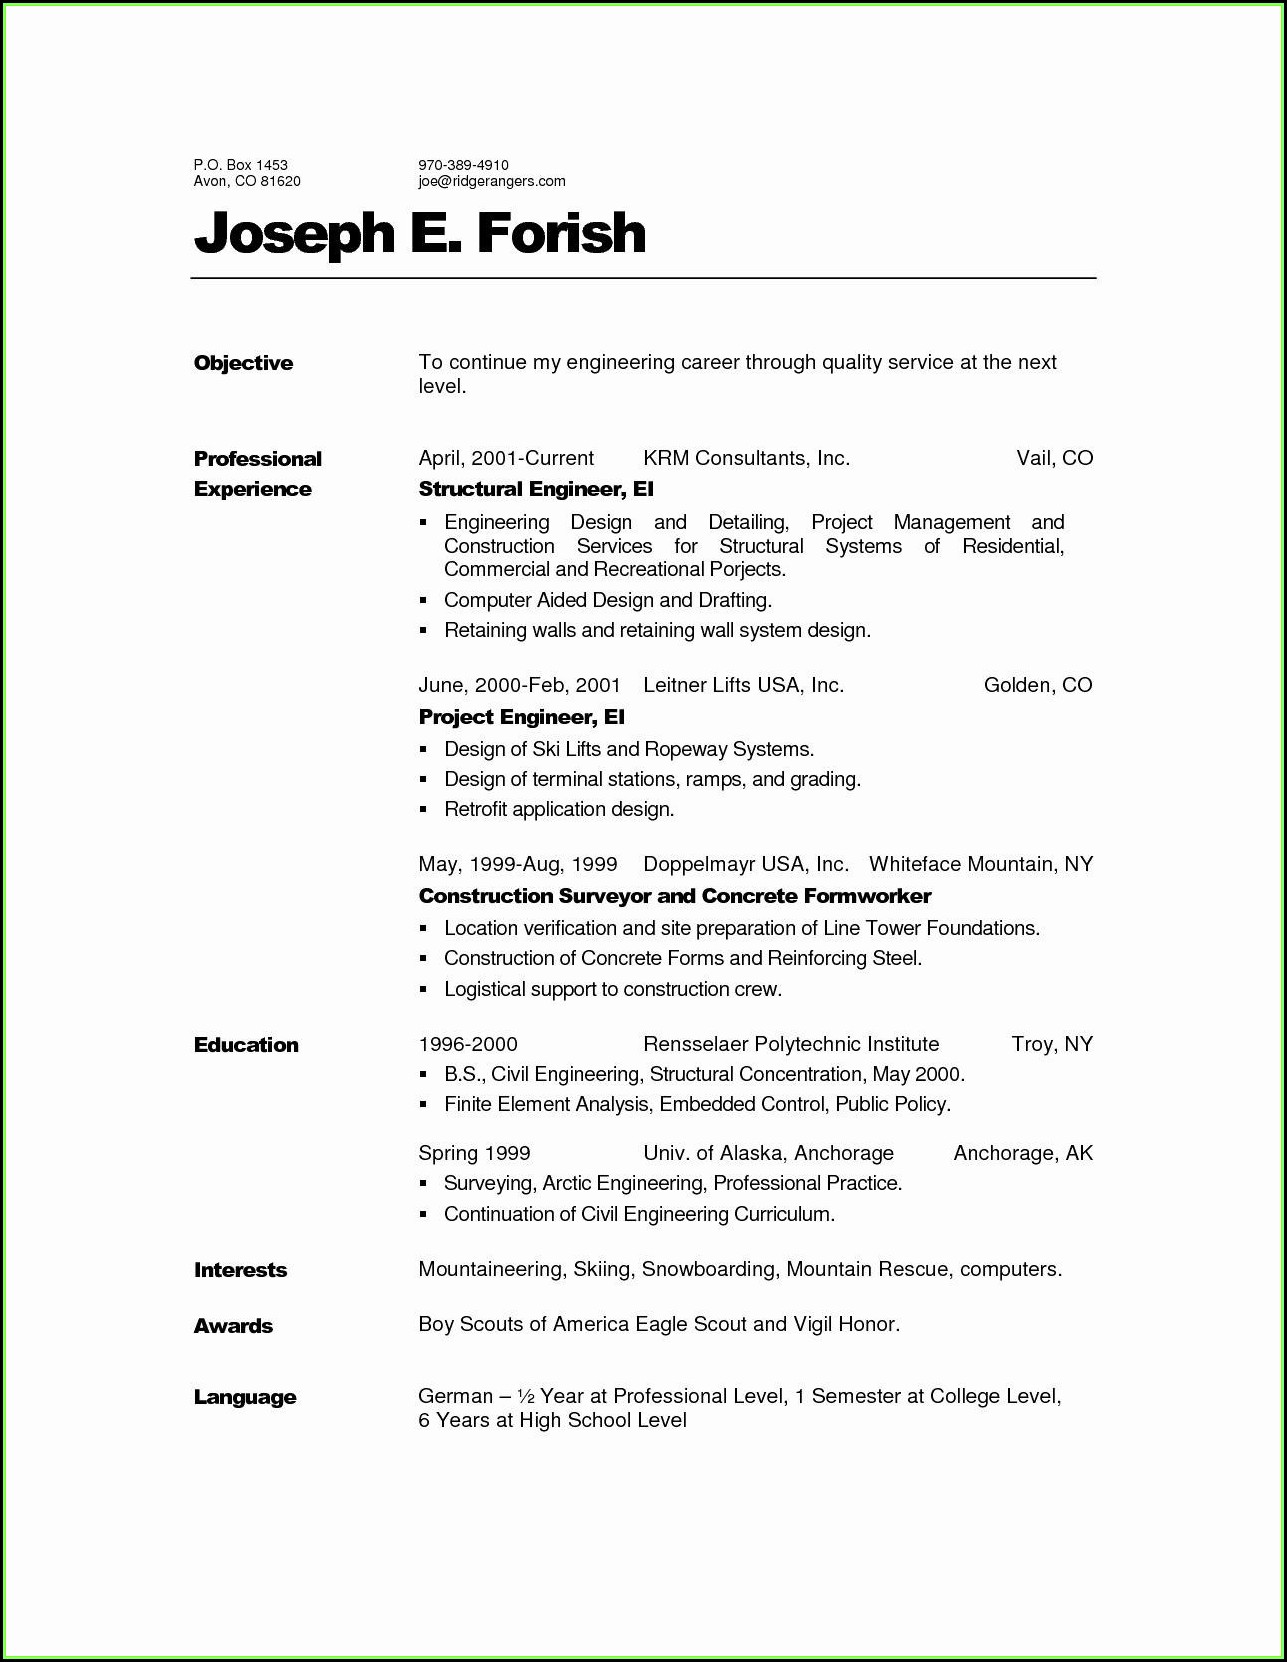 Resume Applying For Federal Jobs